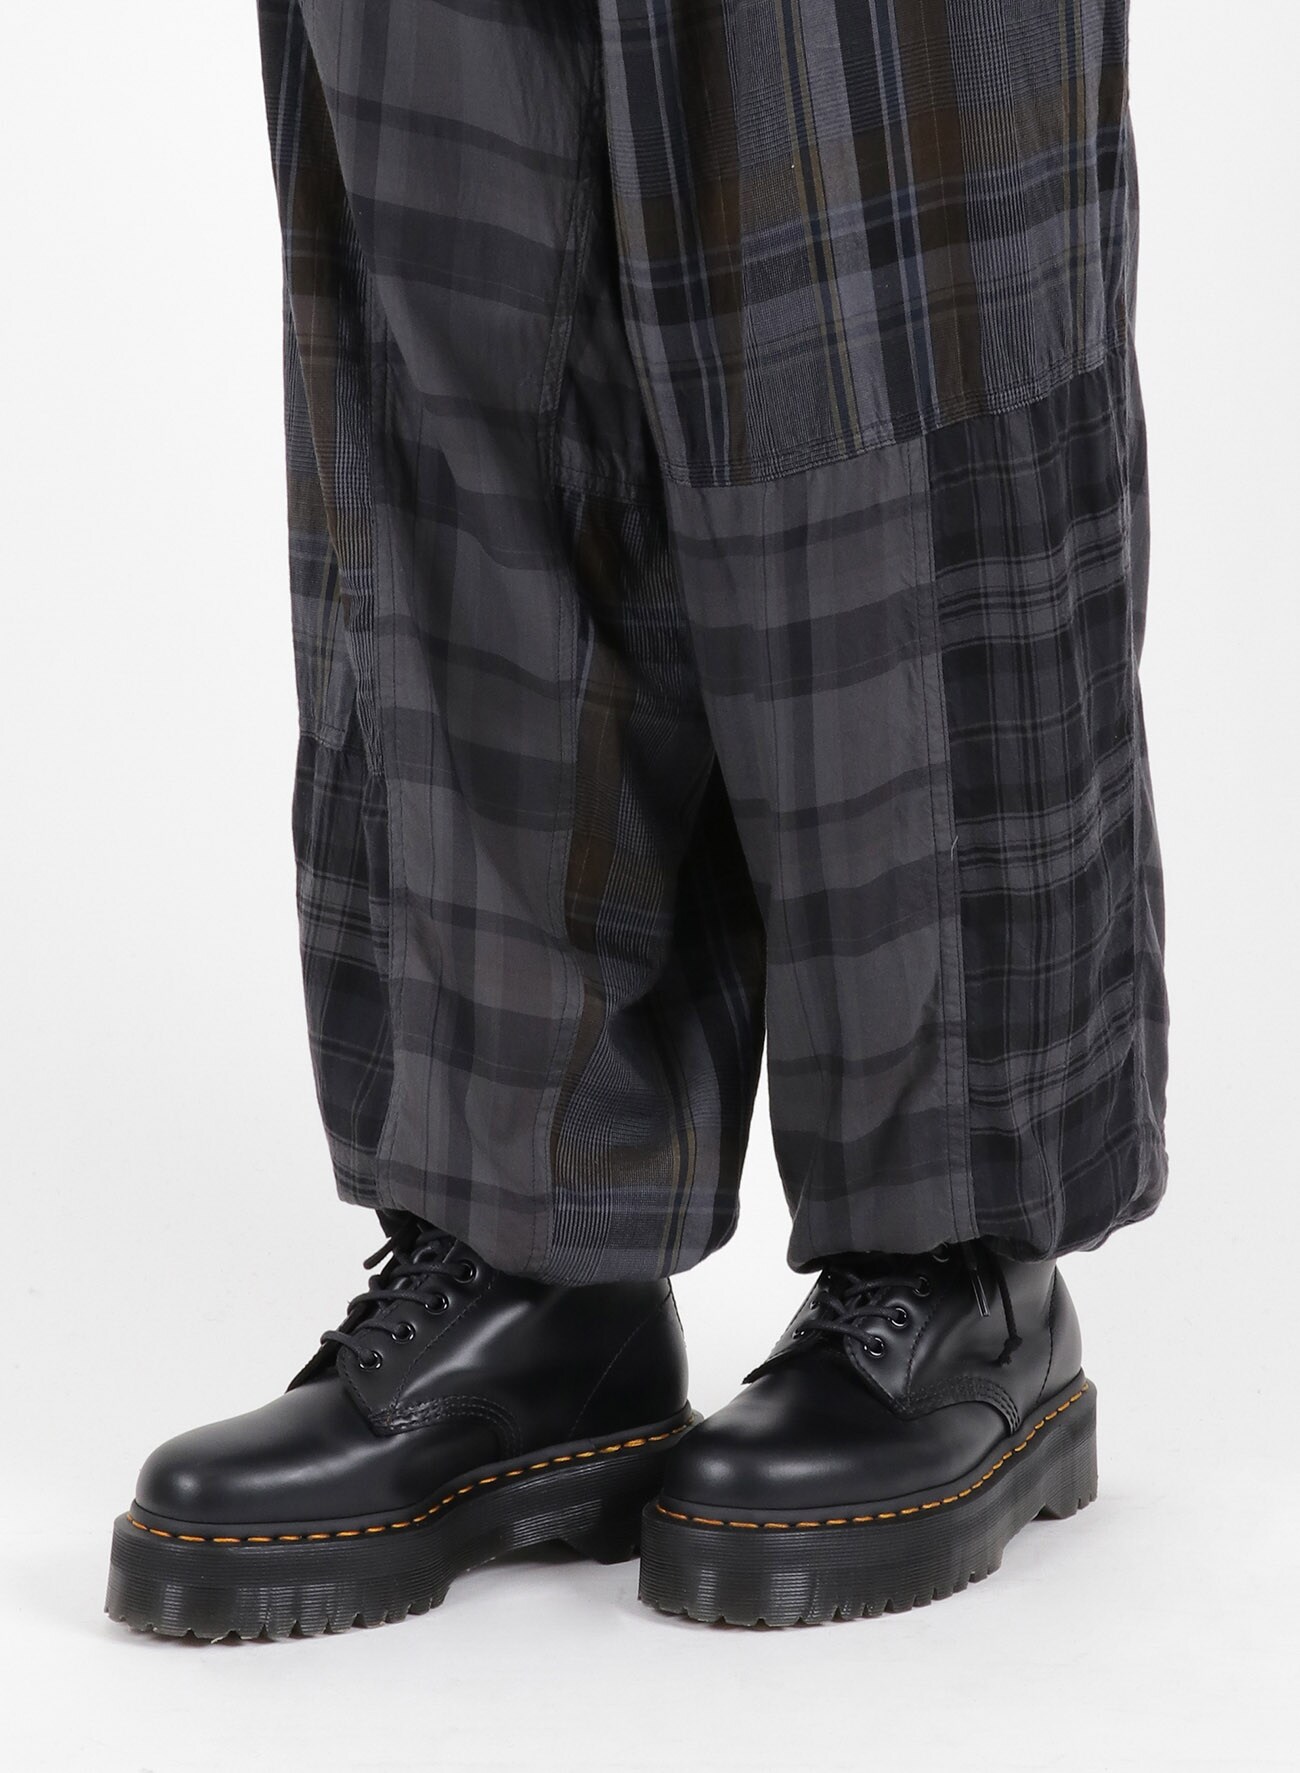 TWILL CHECKED SUSPENDER PANTS